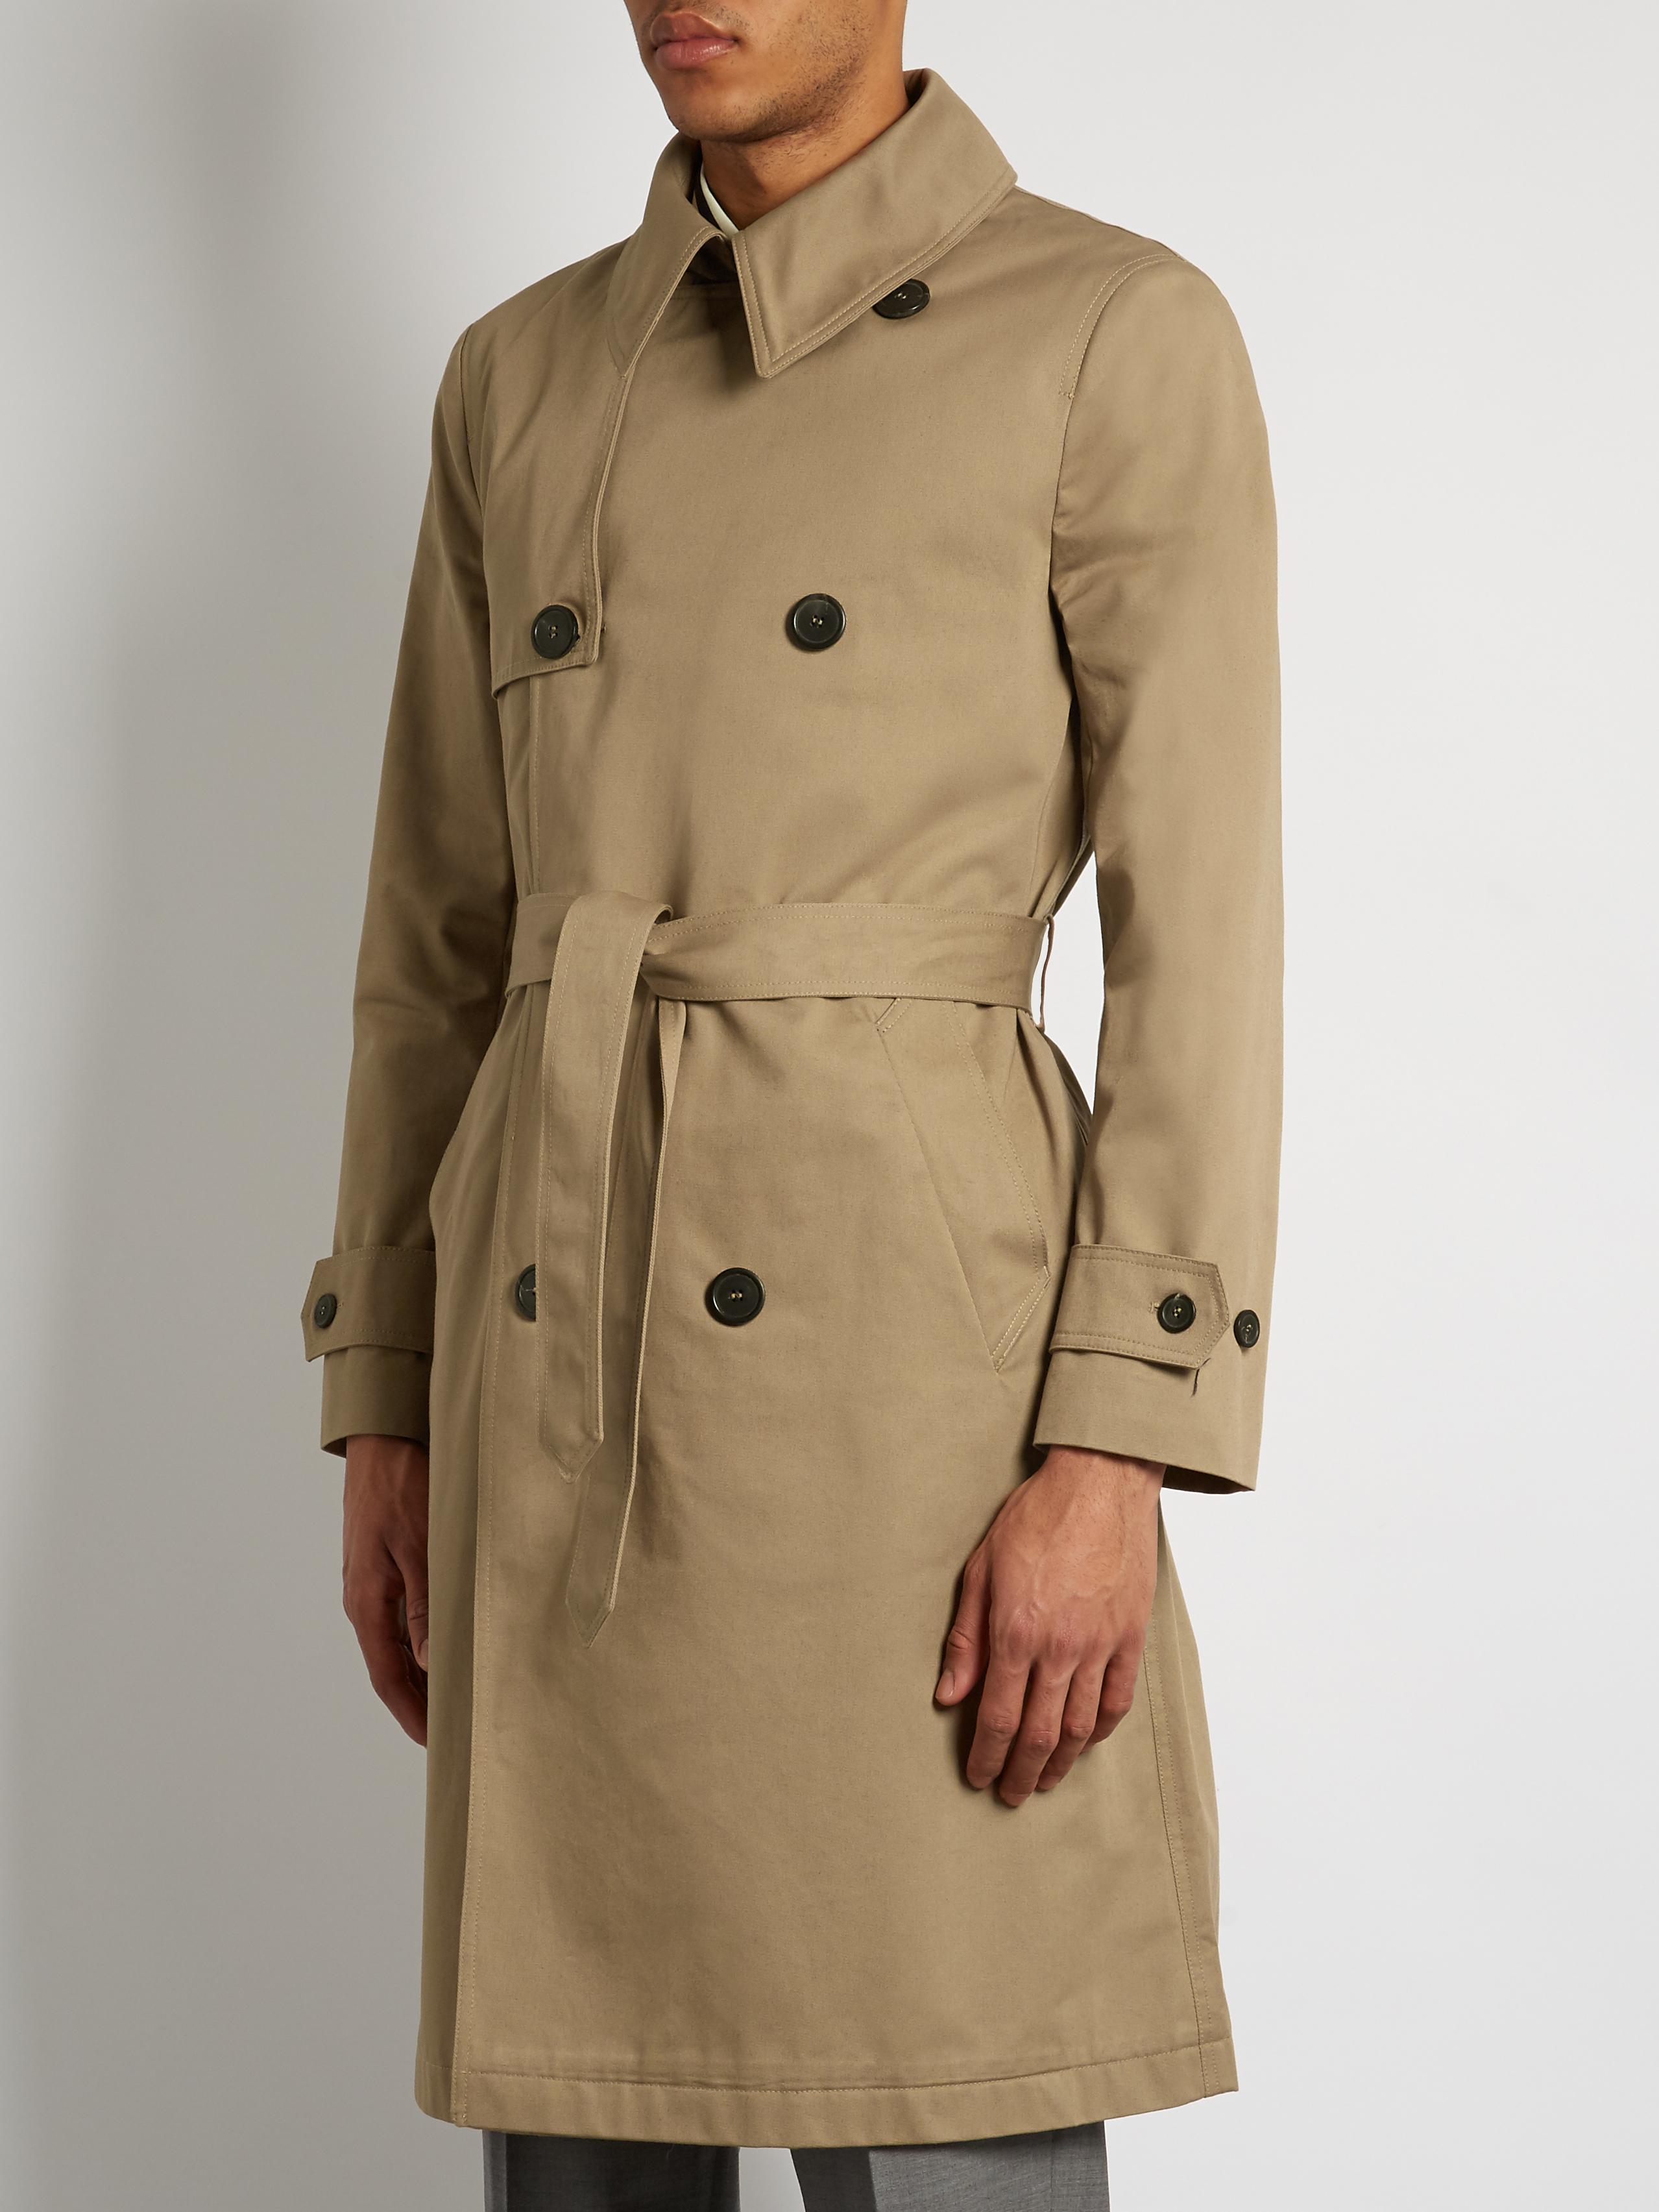 AMI Double-breasted Cotton-twill Trench Coat in Natural for Men - Lyst